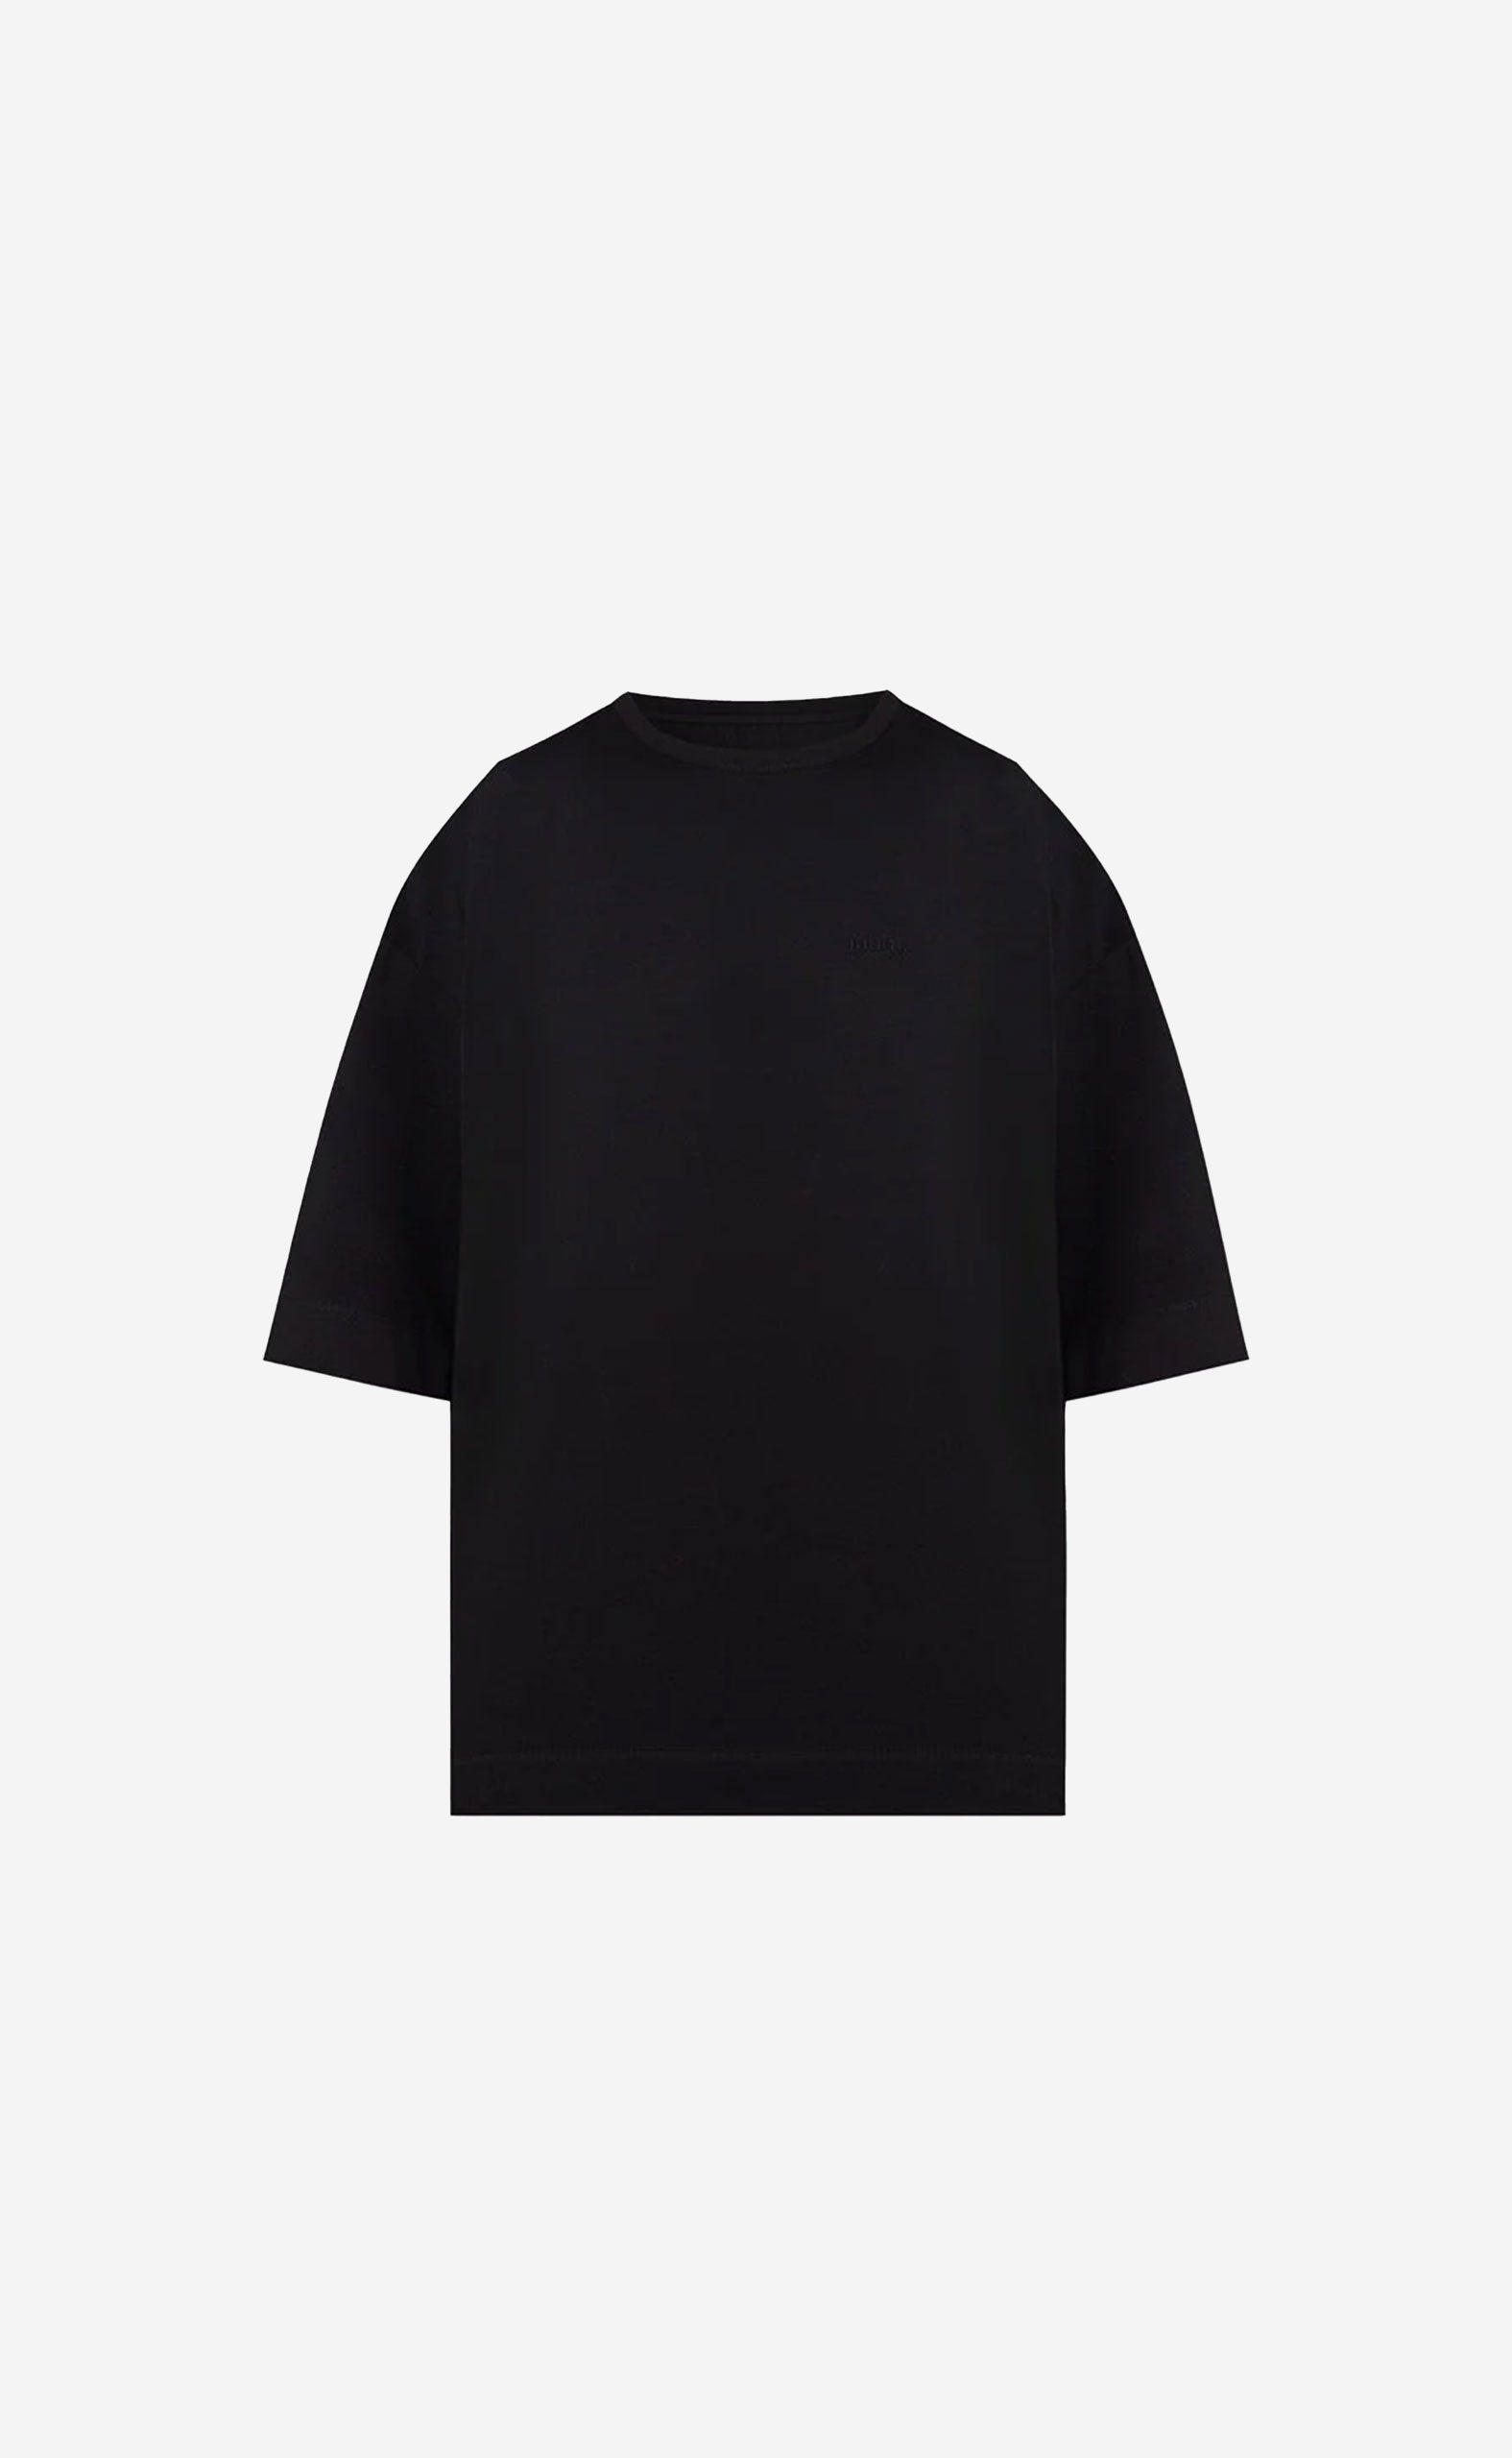 BLACK OVER FIT GRAPHIC T-SHIRTS